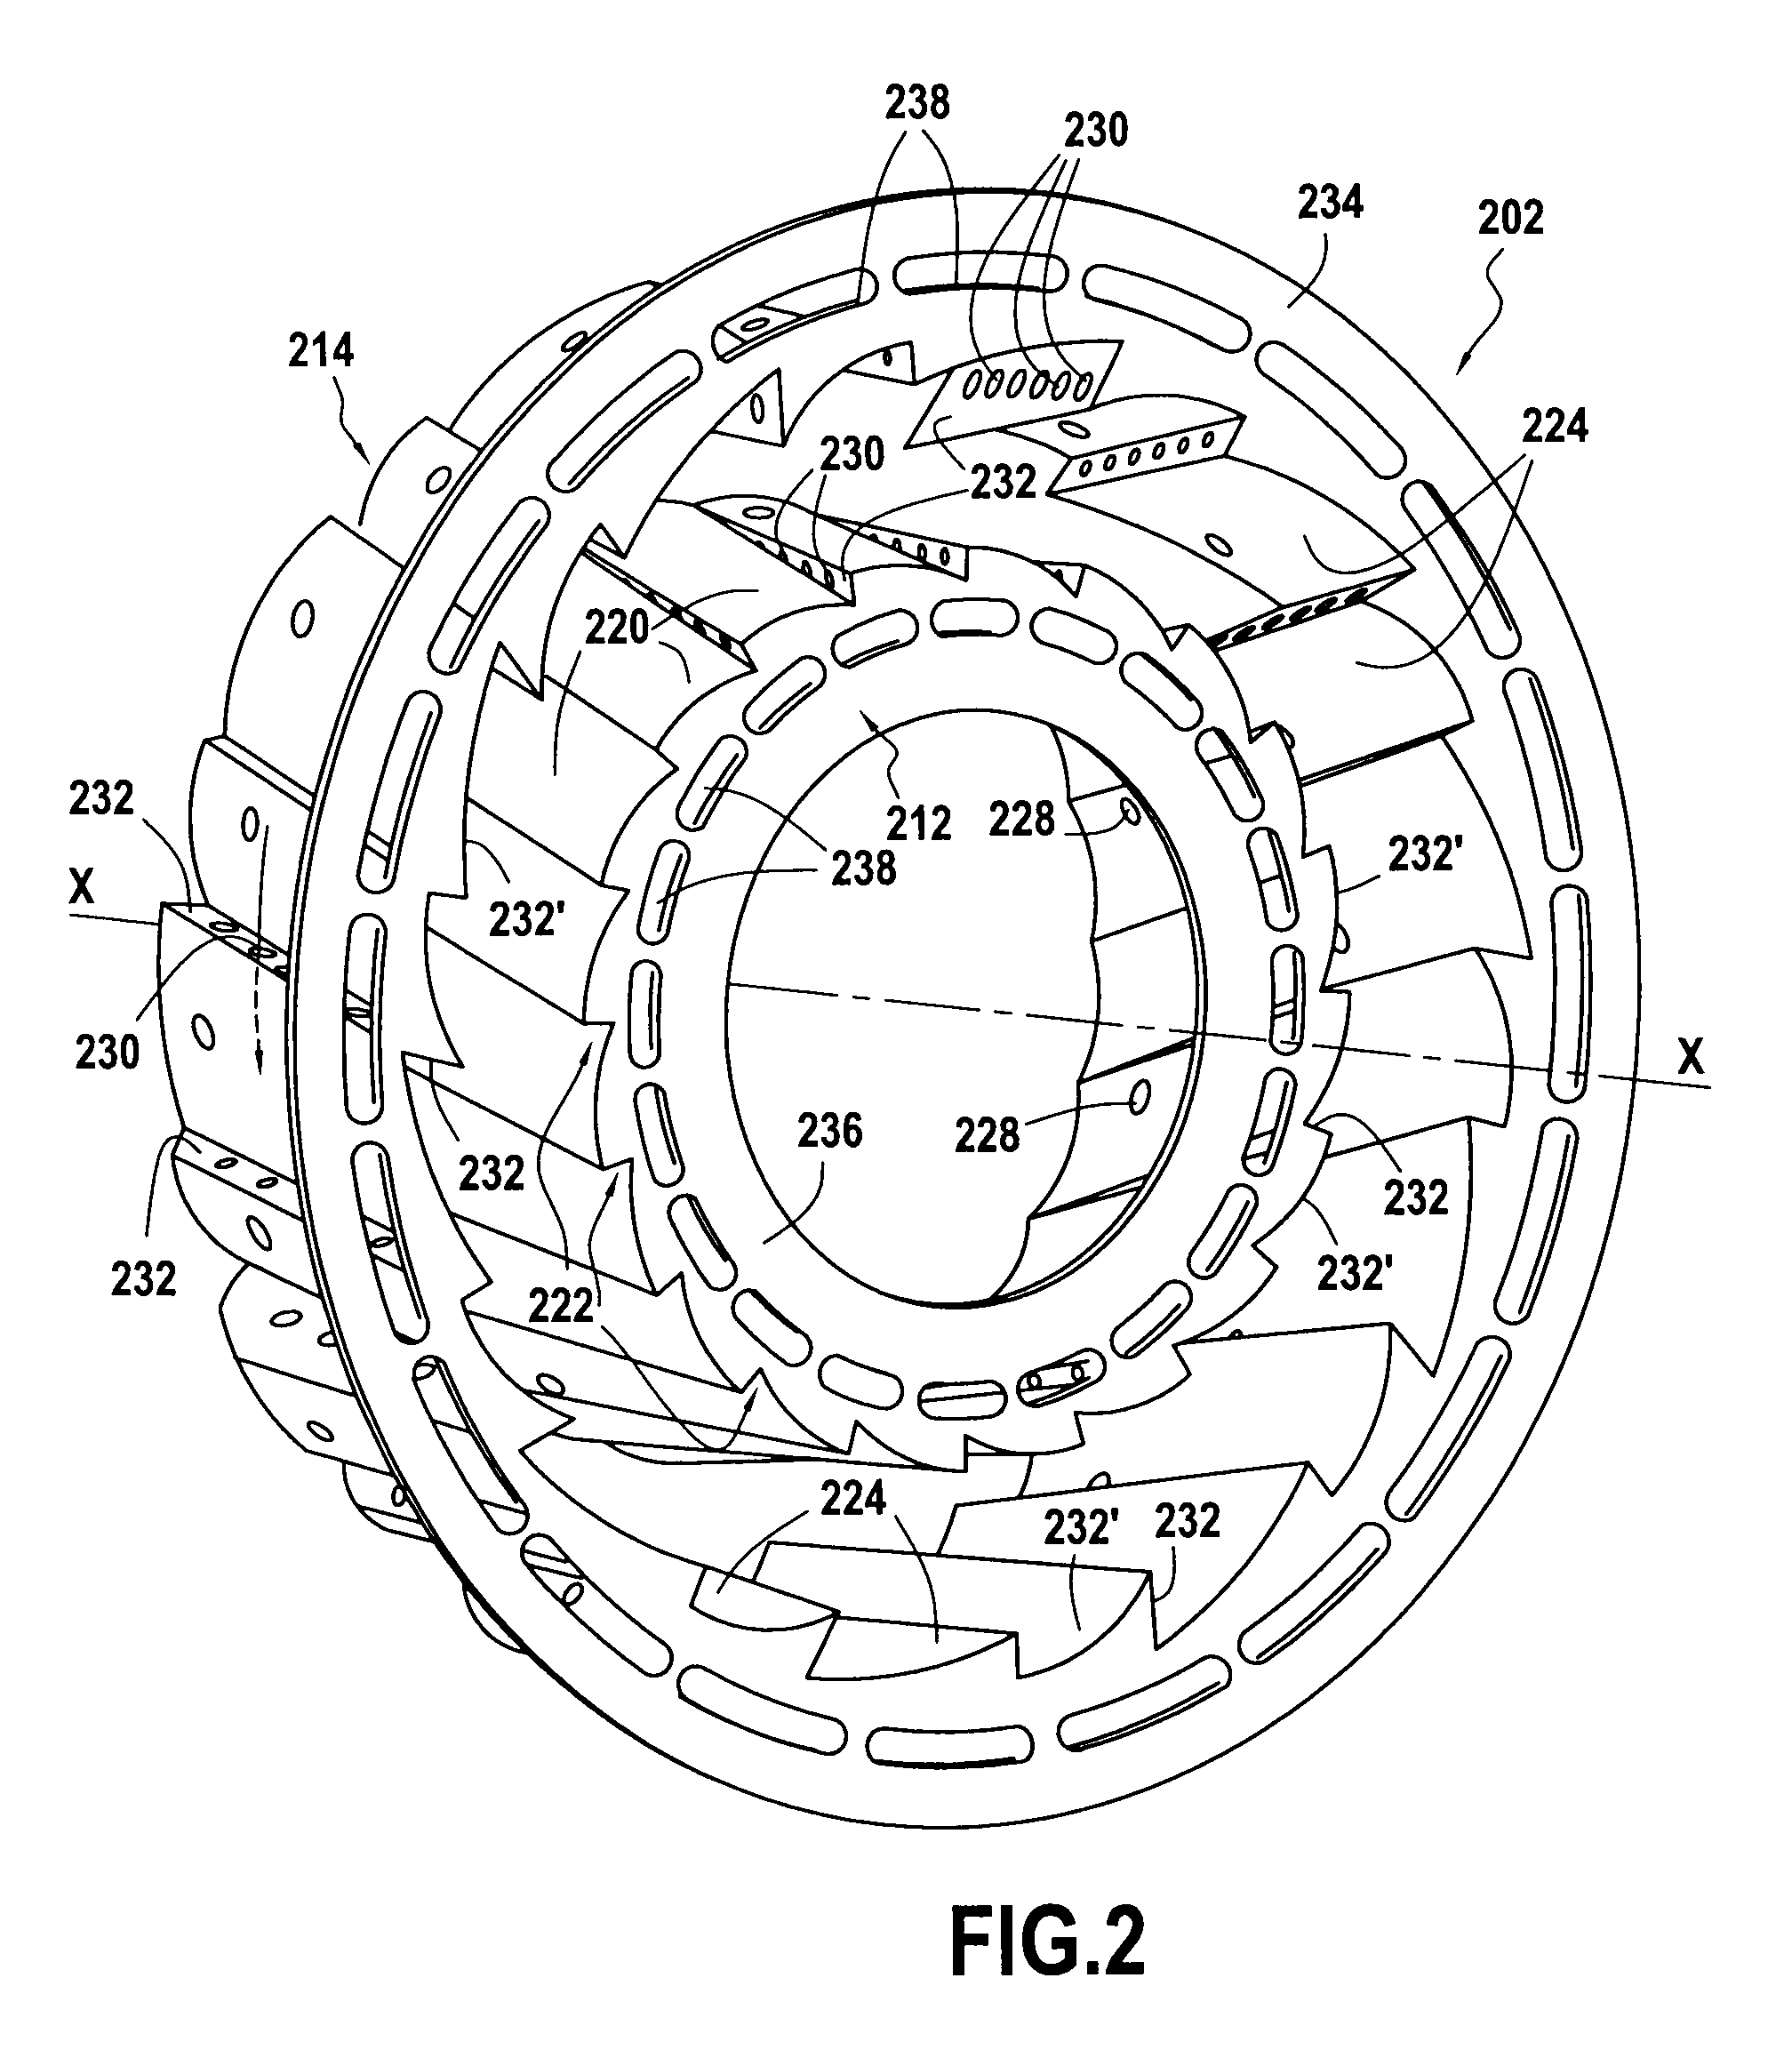 Turbomachine combustion chamber with helical air flow